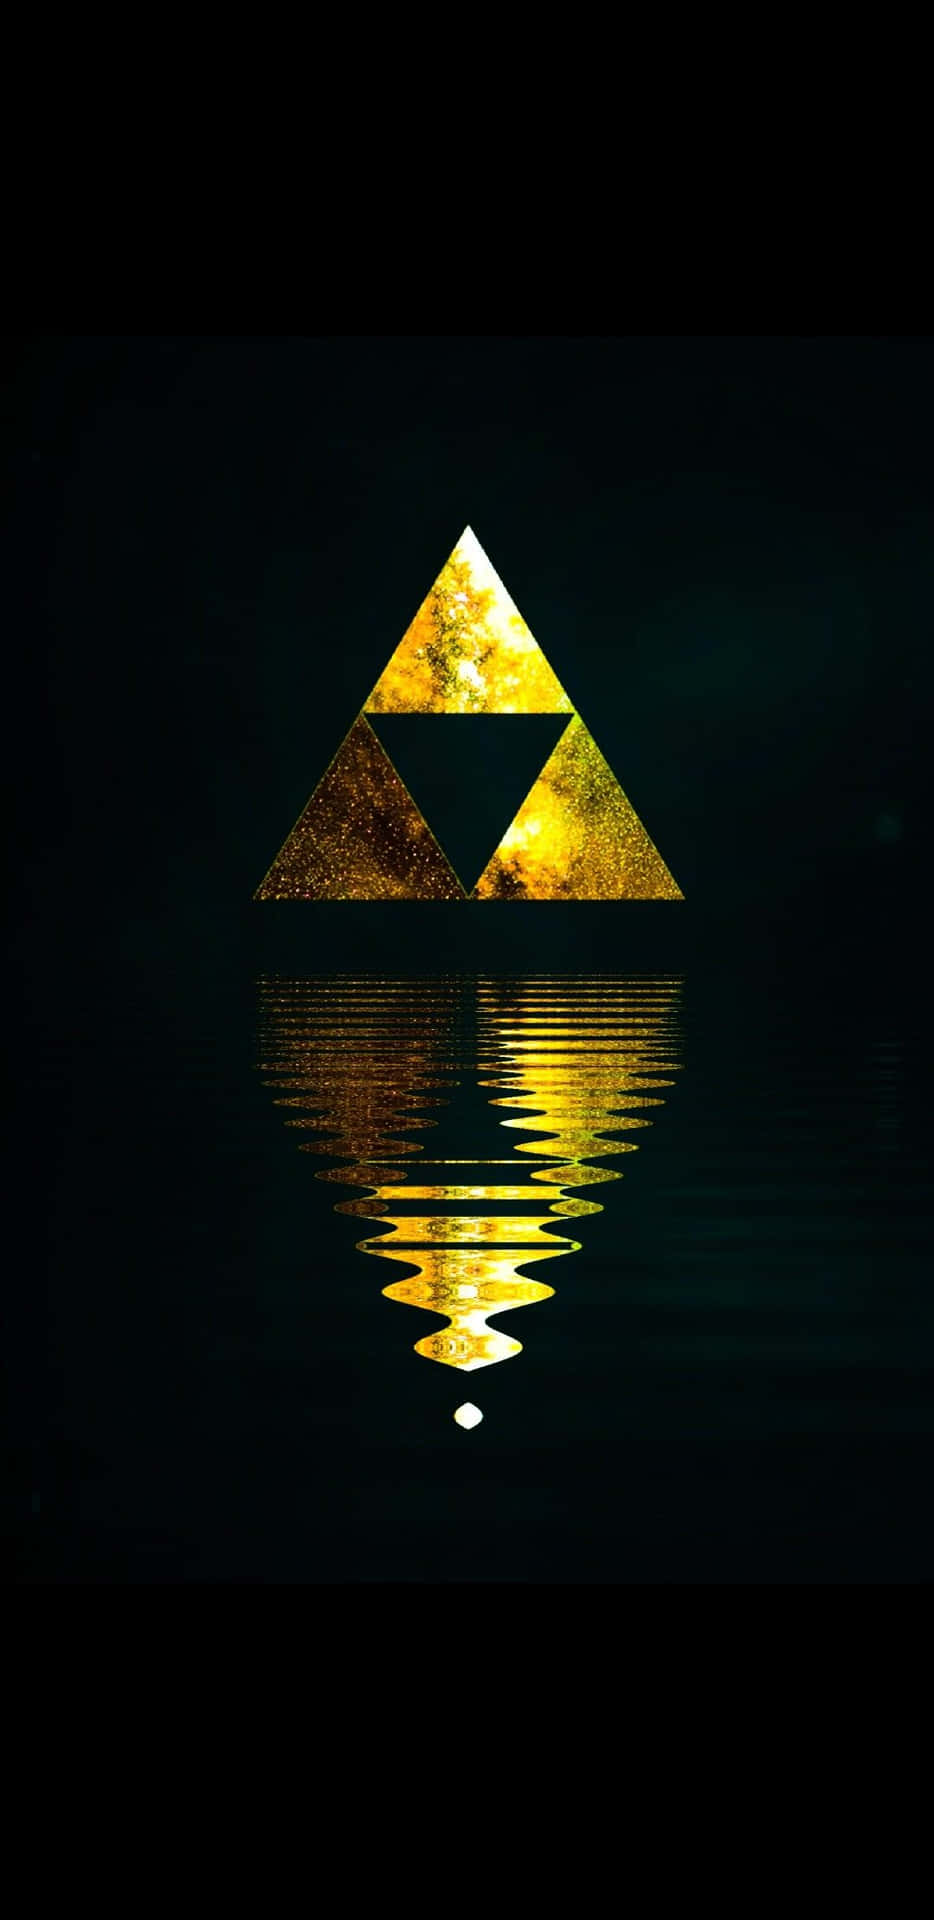 Possessing The Triforce Of Power